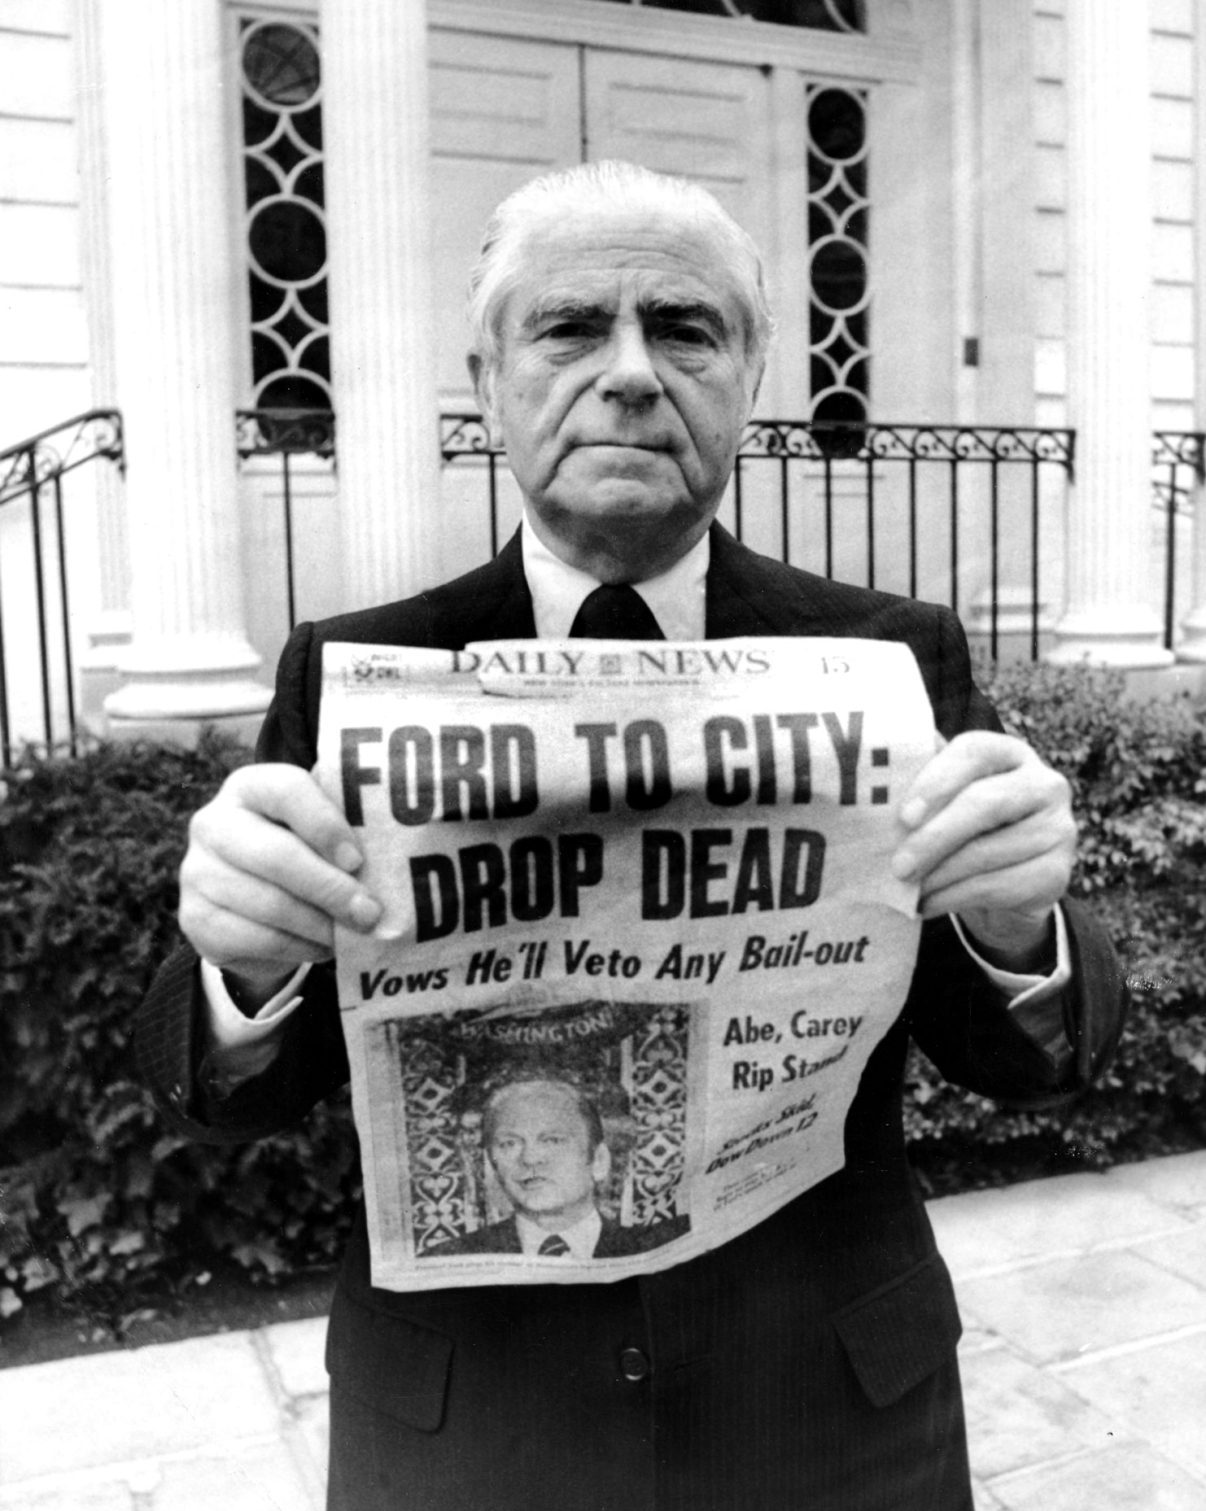  “Ford to City: Drop Dead” was the famous headline that ran on October 30th, 1975 in the New York Daily News, as shown here held by Abraham Beame, Mayor of New York City from 1974-1977. Image: Getty Images.